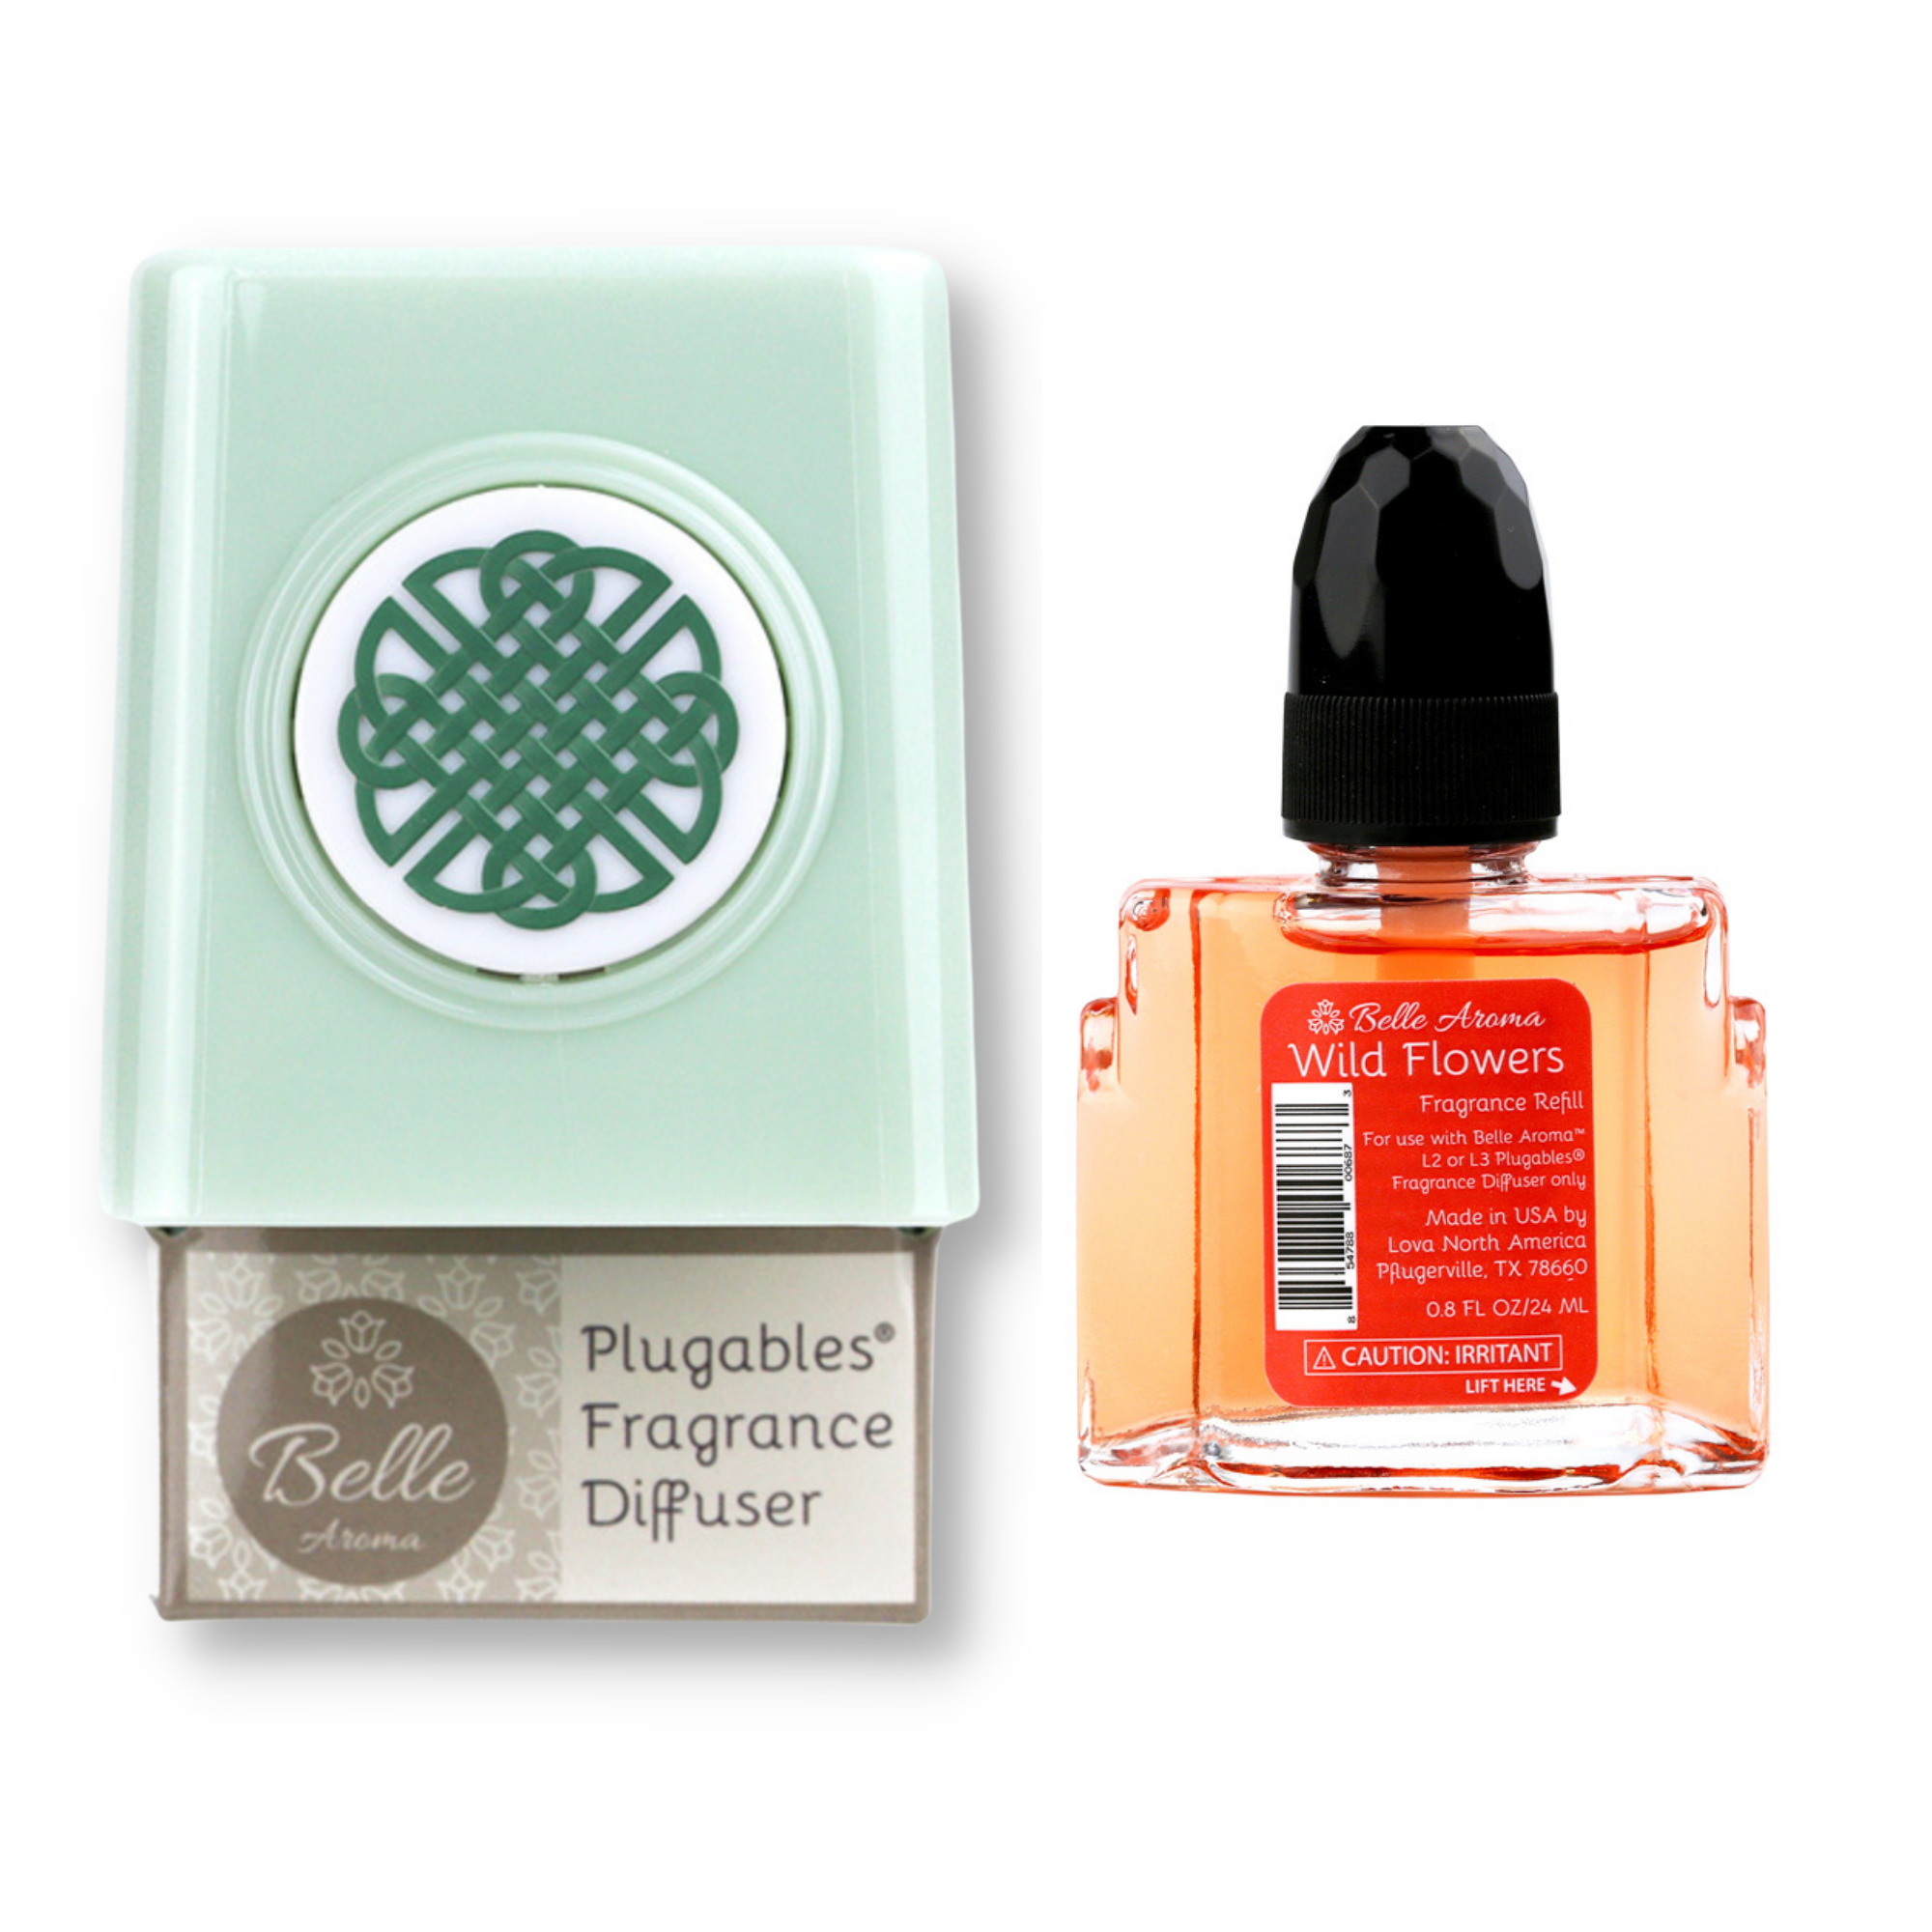 Celtic Knot Medallion Plugables® Plugin Aromalectric® Scented Oil Diffuser - Sea Glass with Wild Flowers Fragrance Oil Home Fragrance Accessories